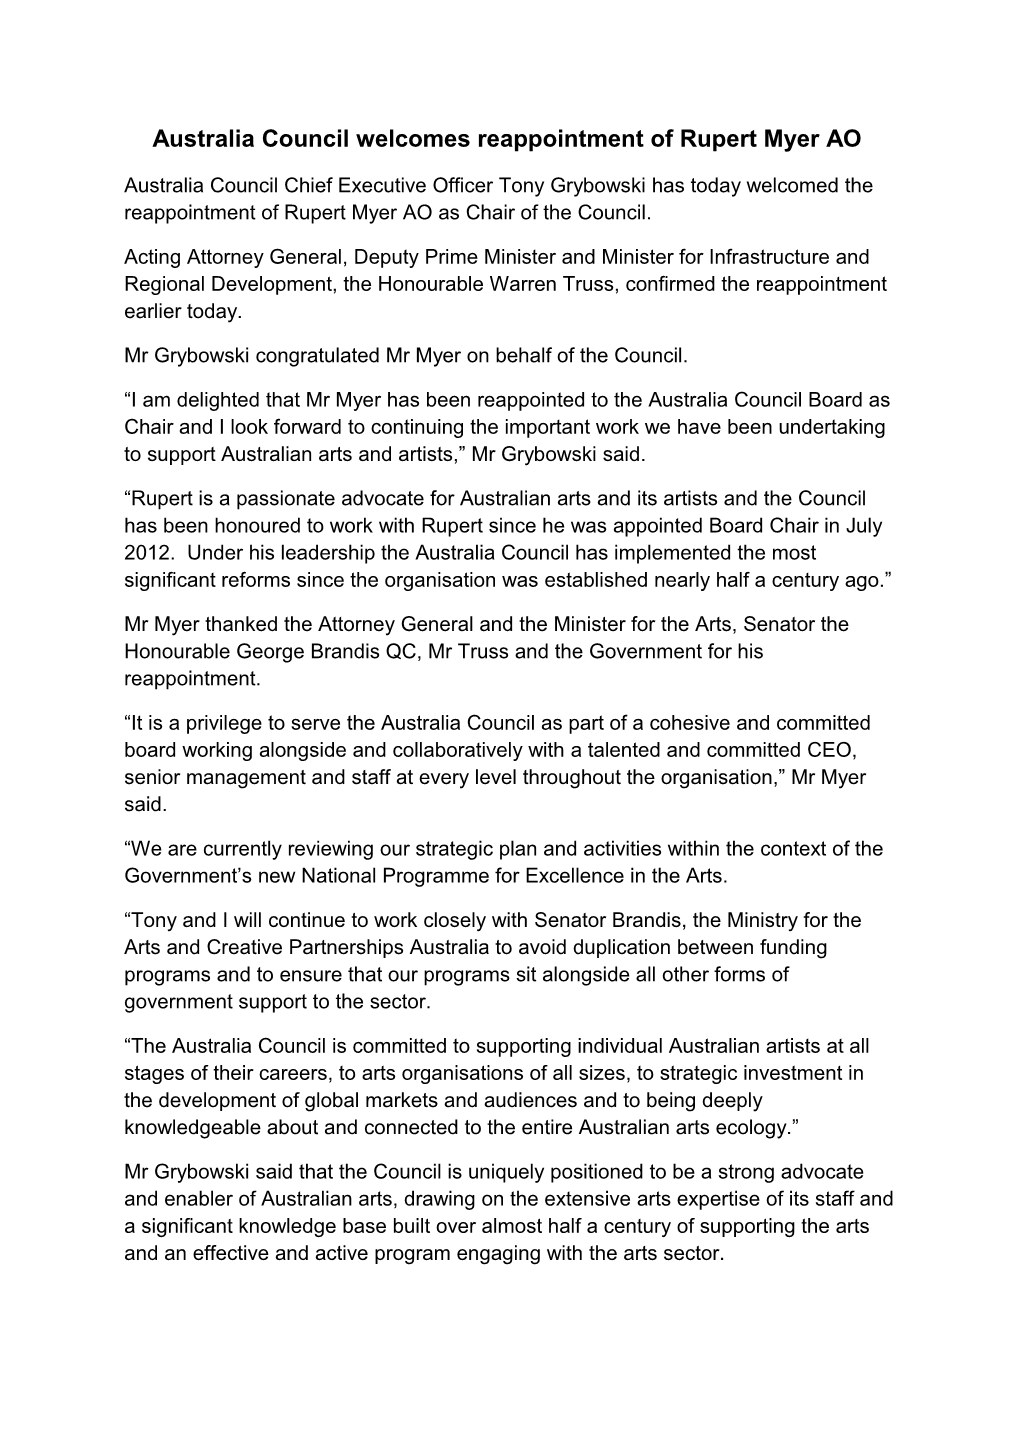 Australia Council Welcomes Reappointment of Rupert Myer AO